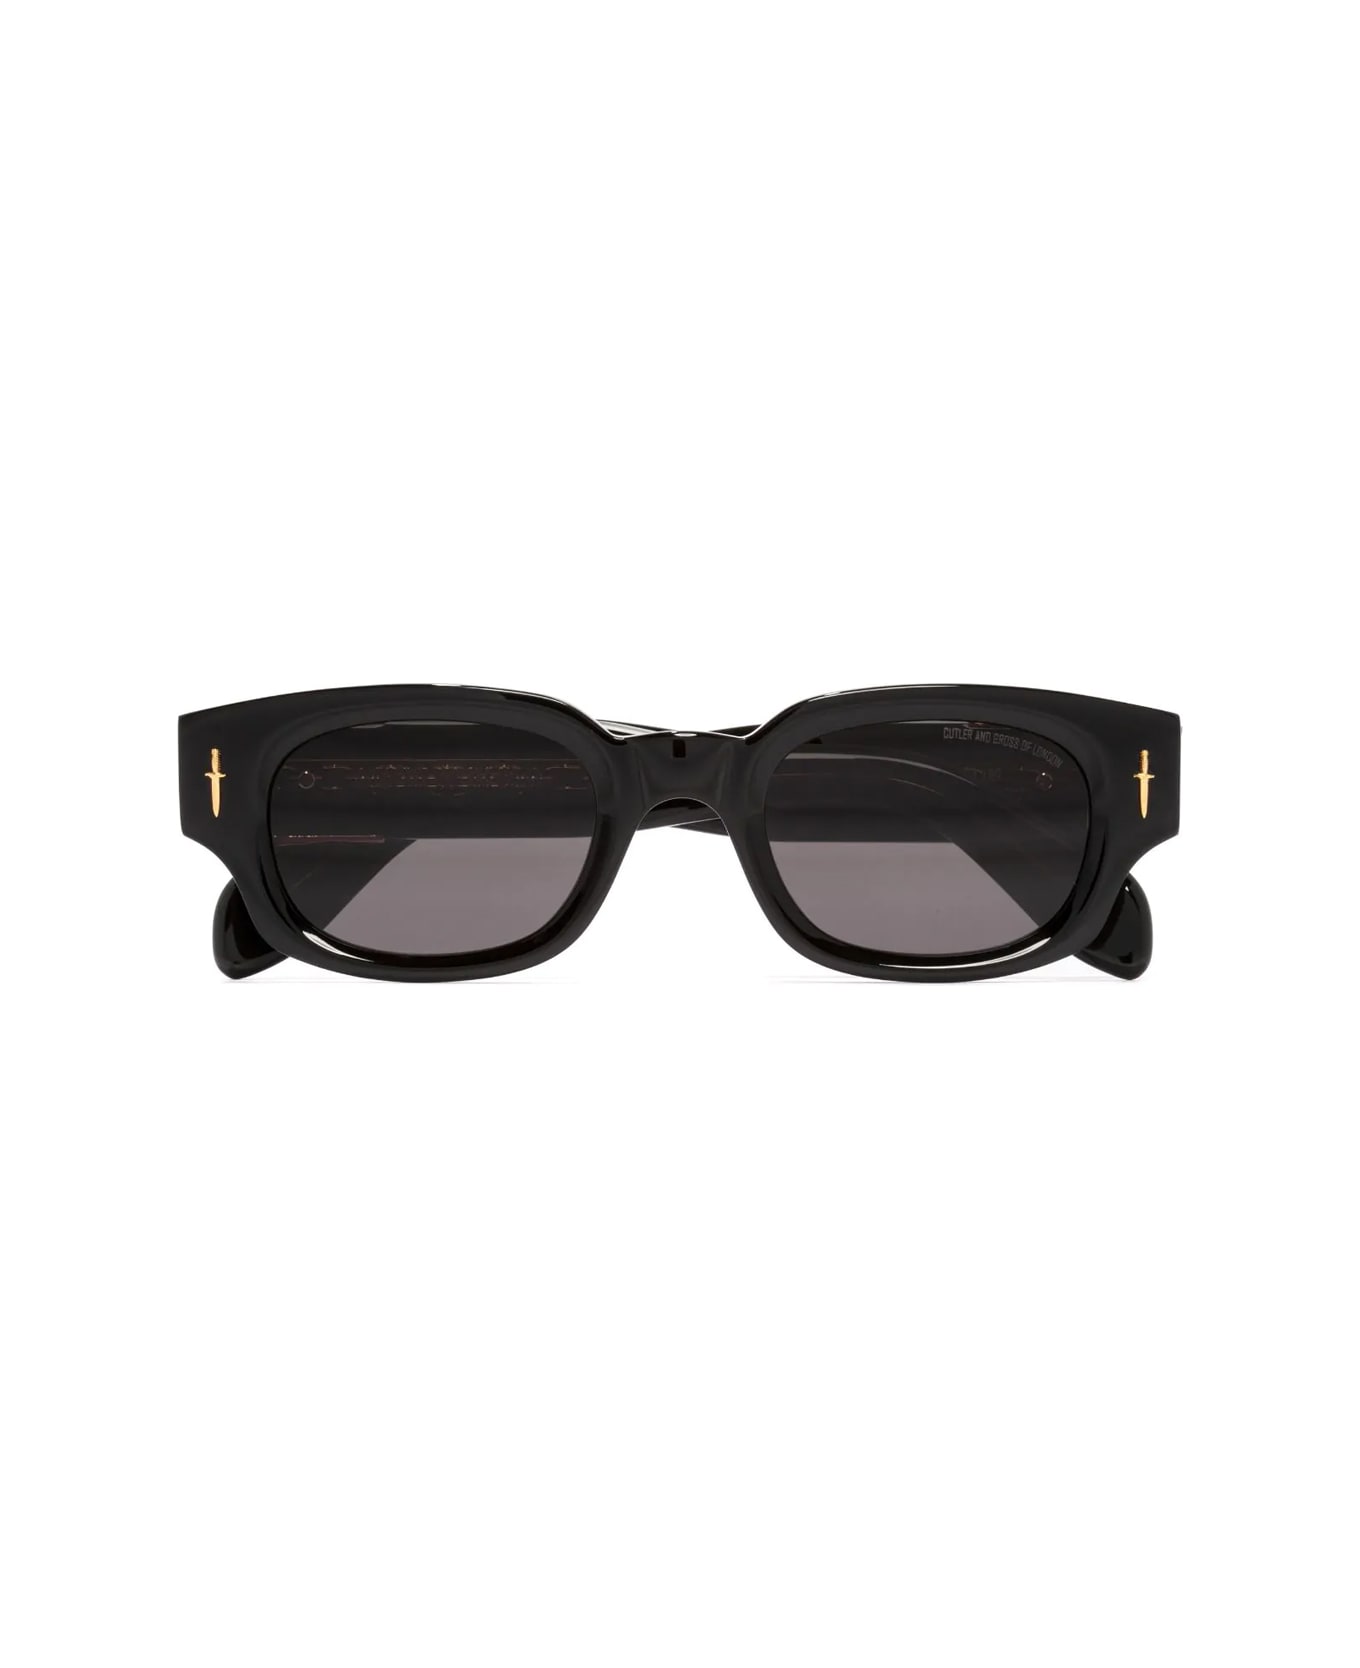 Cutler and Gross Great Frog 004 01 Gold Sunglasses - Nero